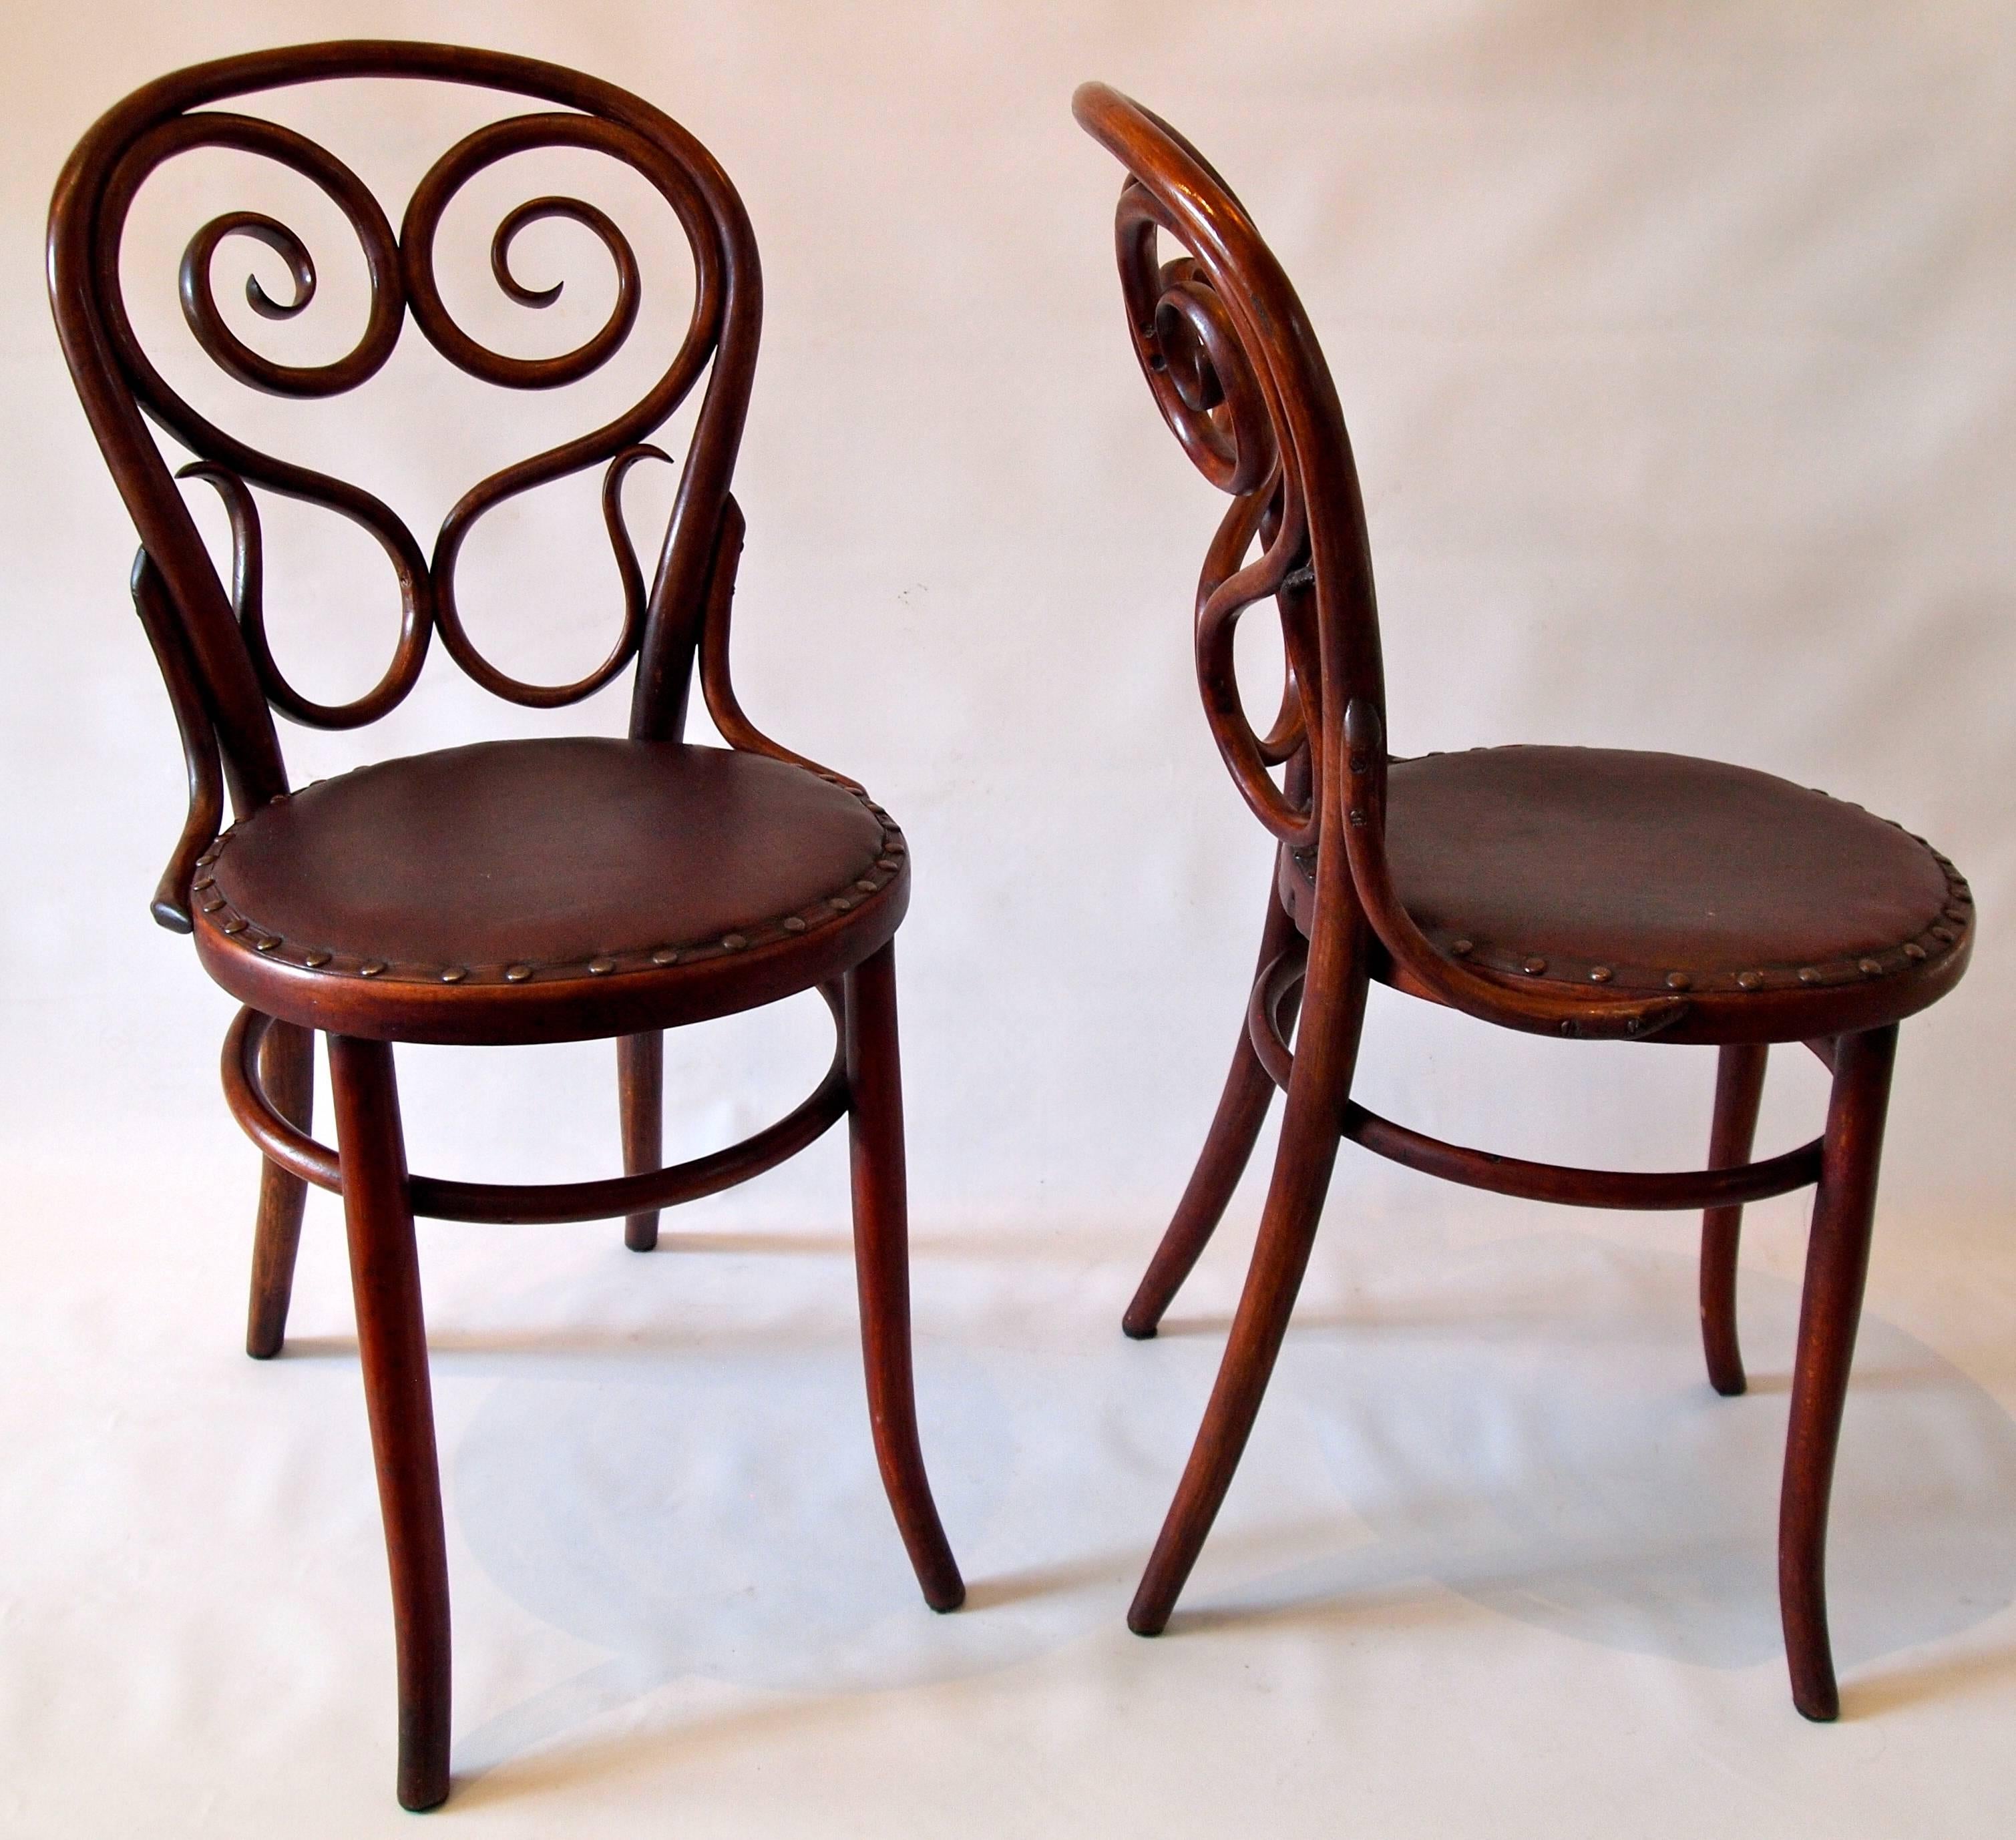 Wonderful set of four bentwood side chairs by Thonet with original upholstered seats,
circa 1900
Vienna.